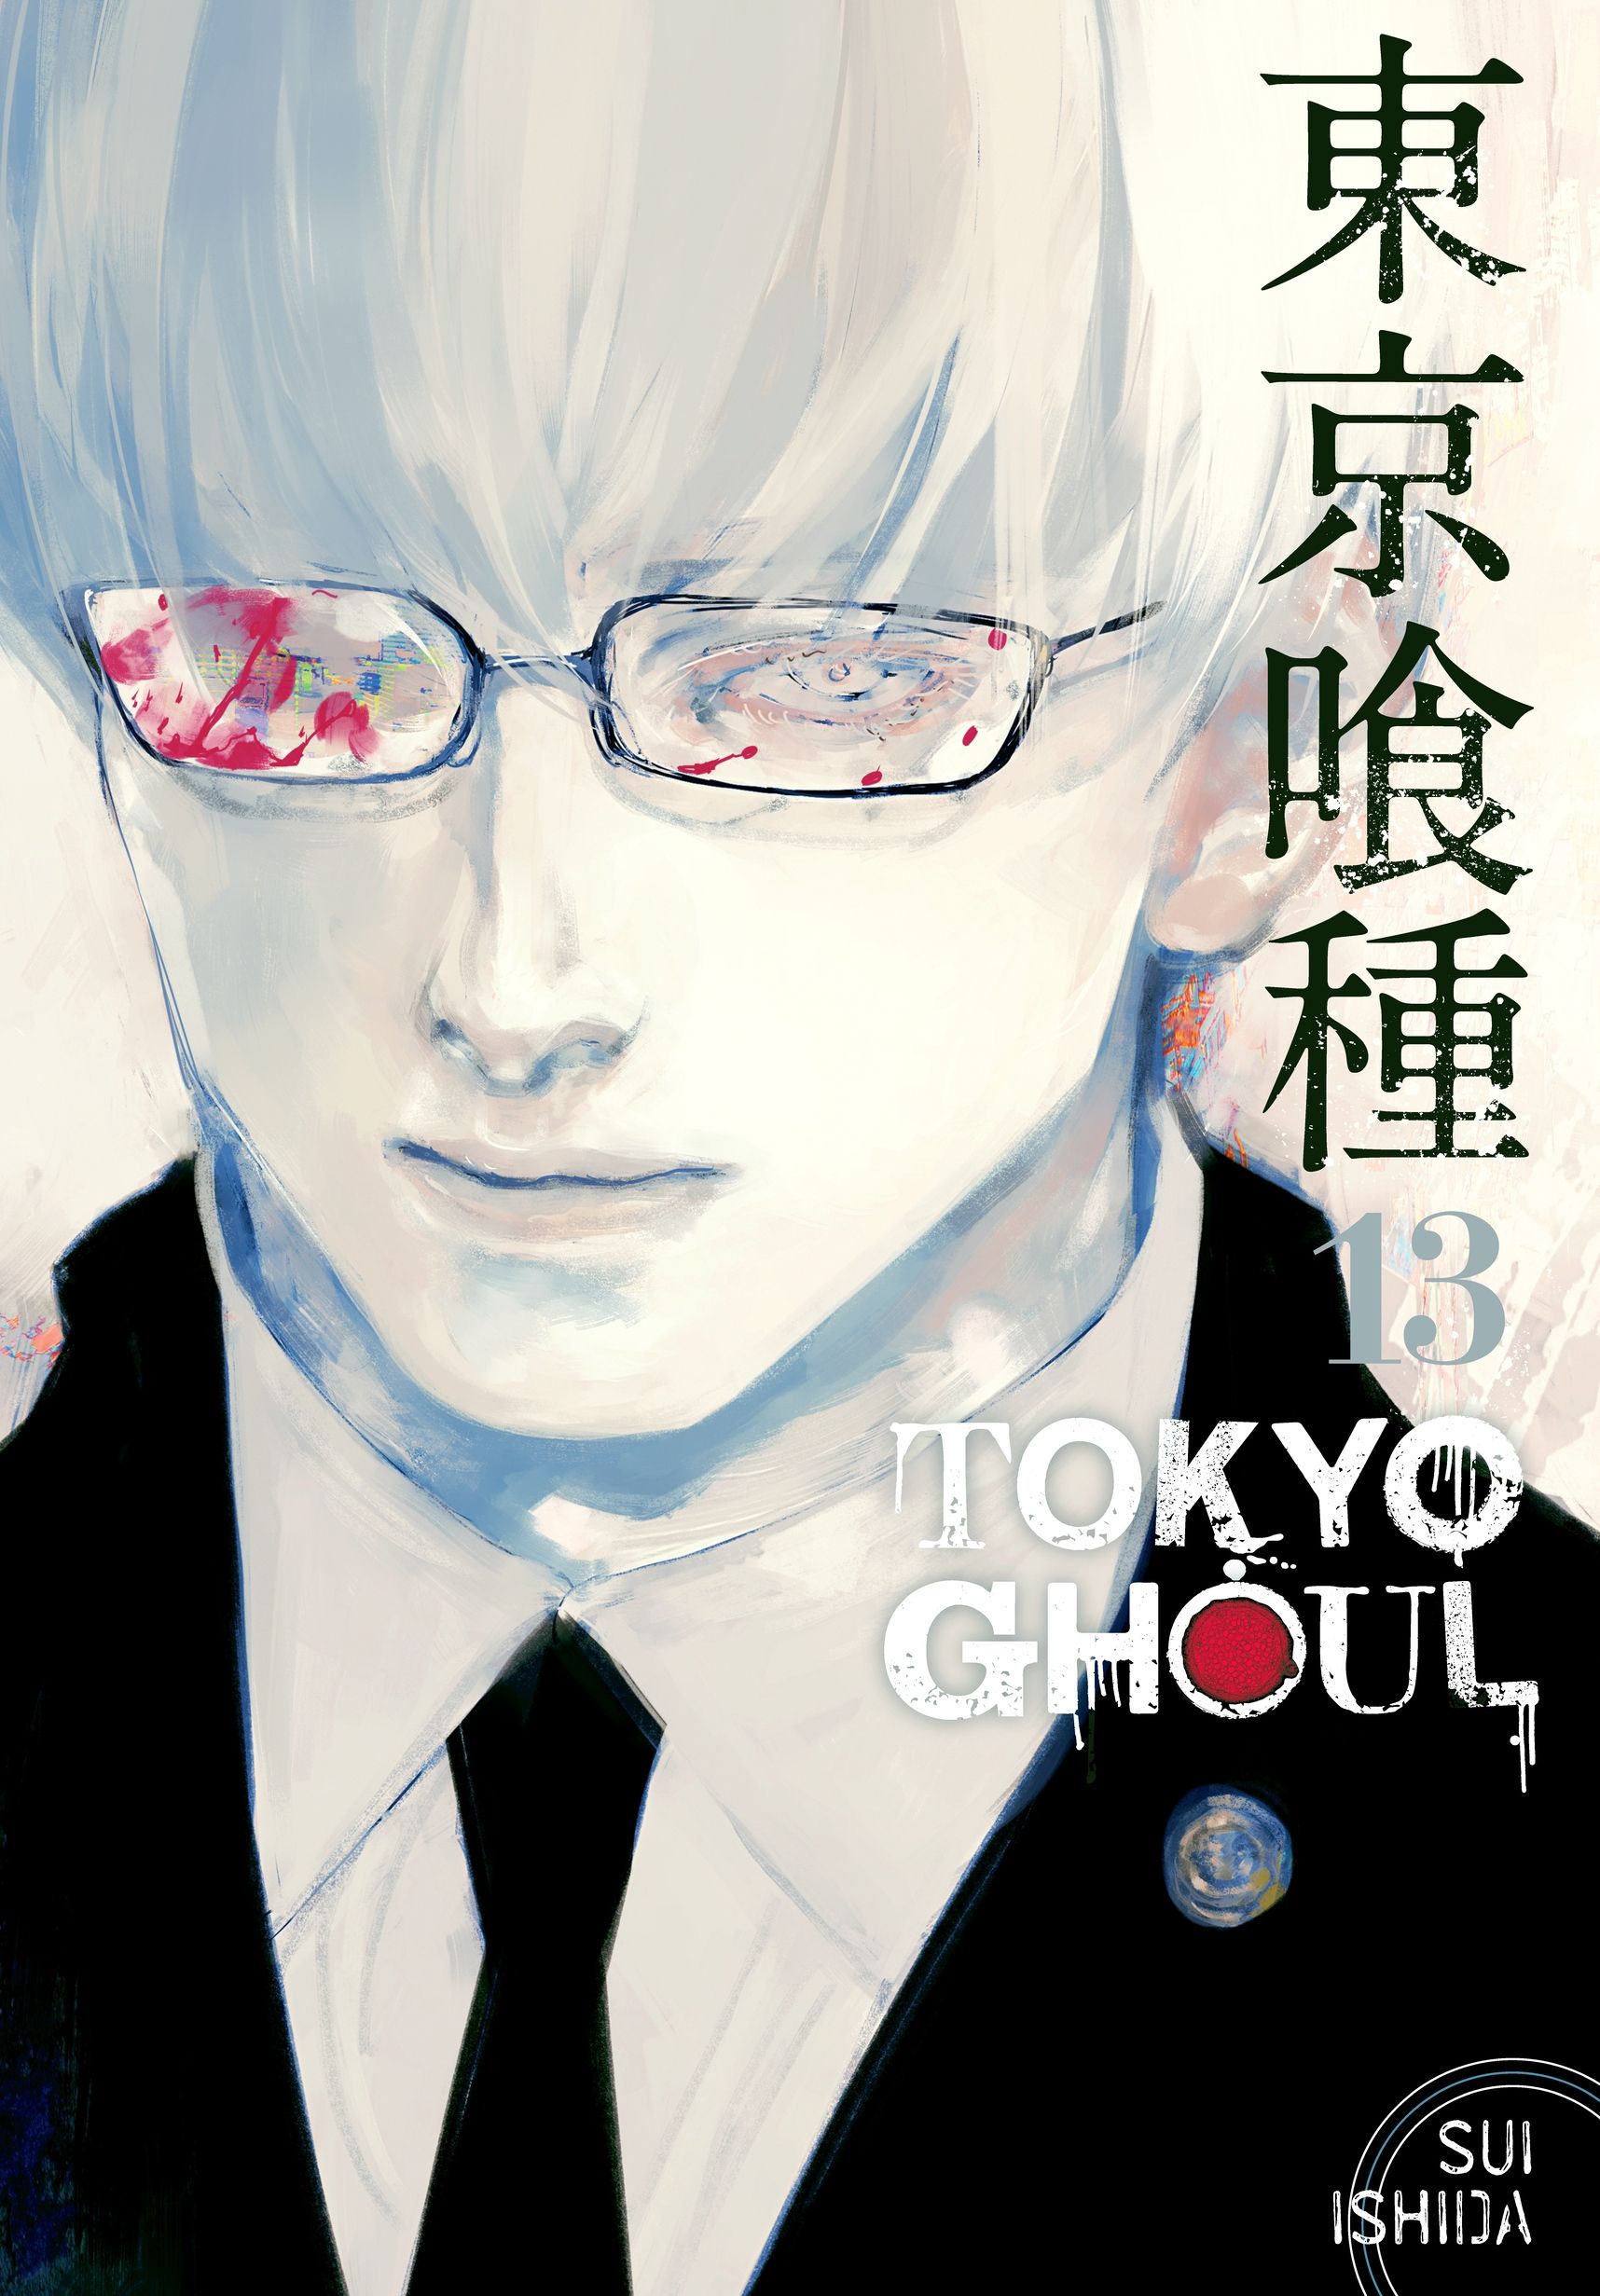 Tokyo Ghoul volume cover 13 featuring a potrait of Kisho Arima